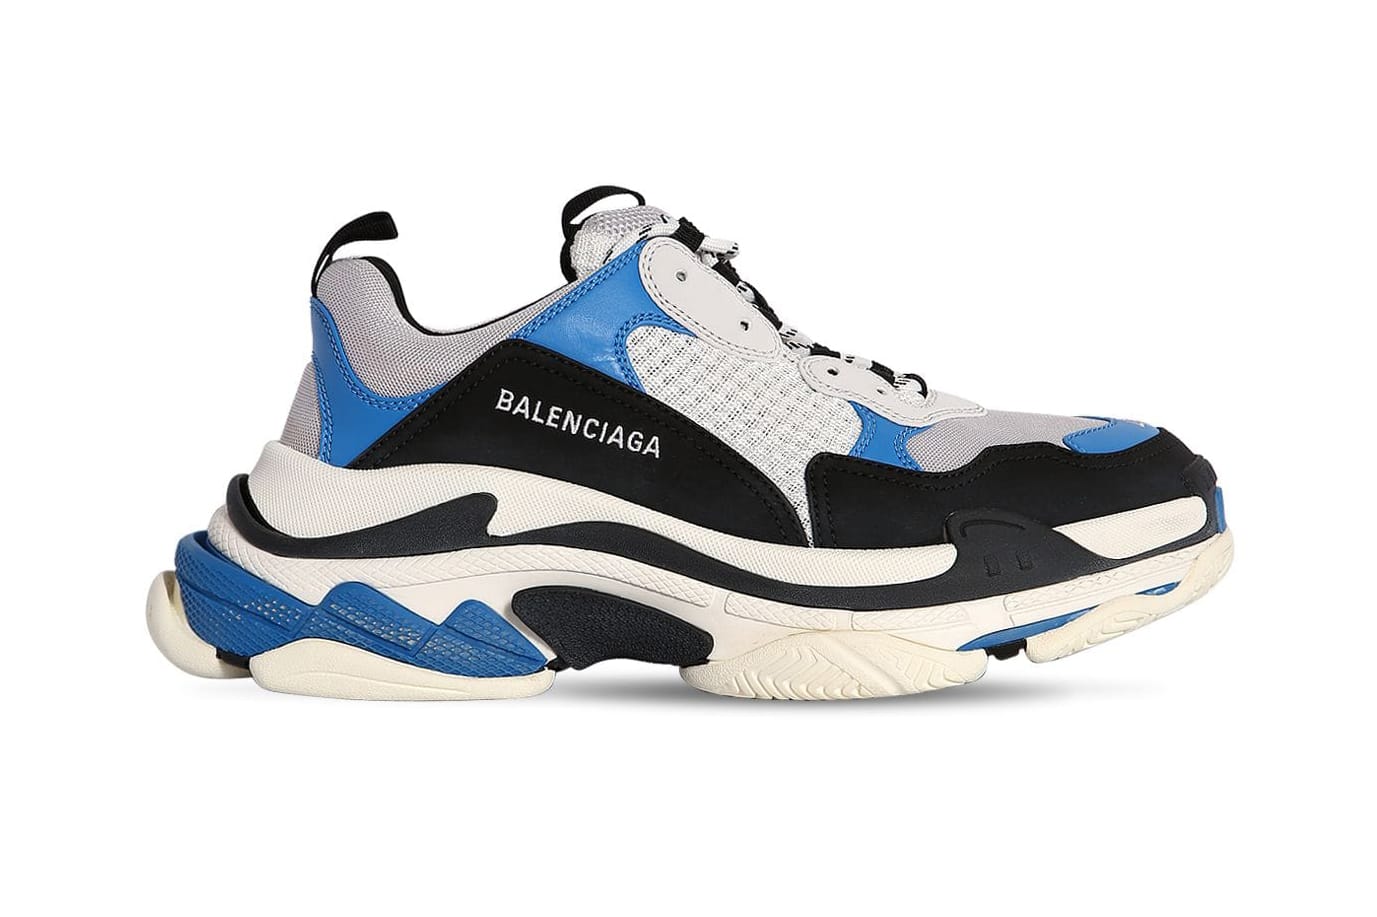 Balenciaga Curly Lace Blue Triple S Sneakers